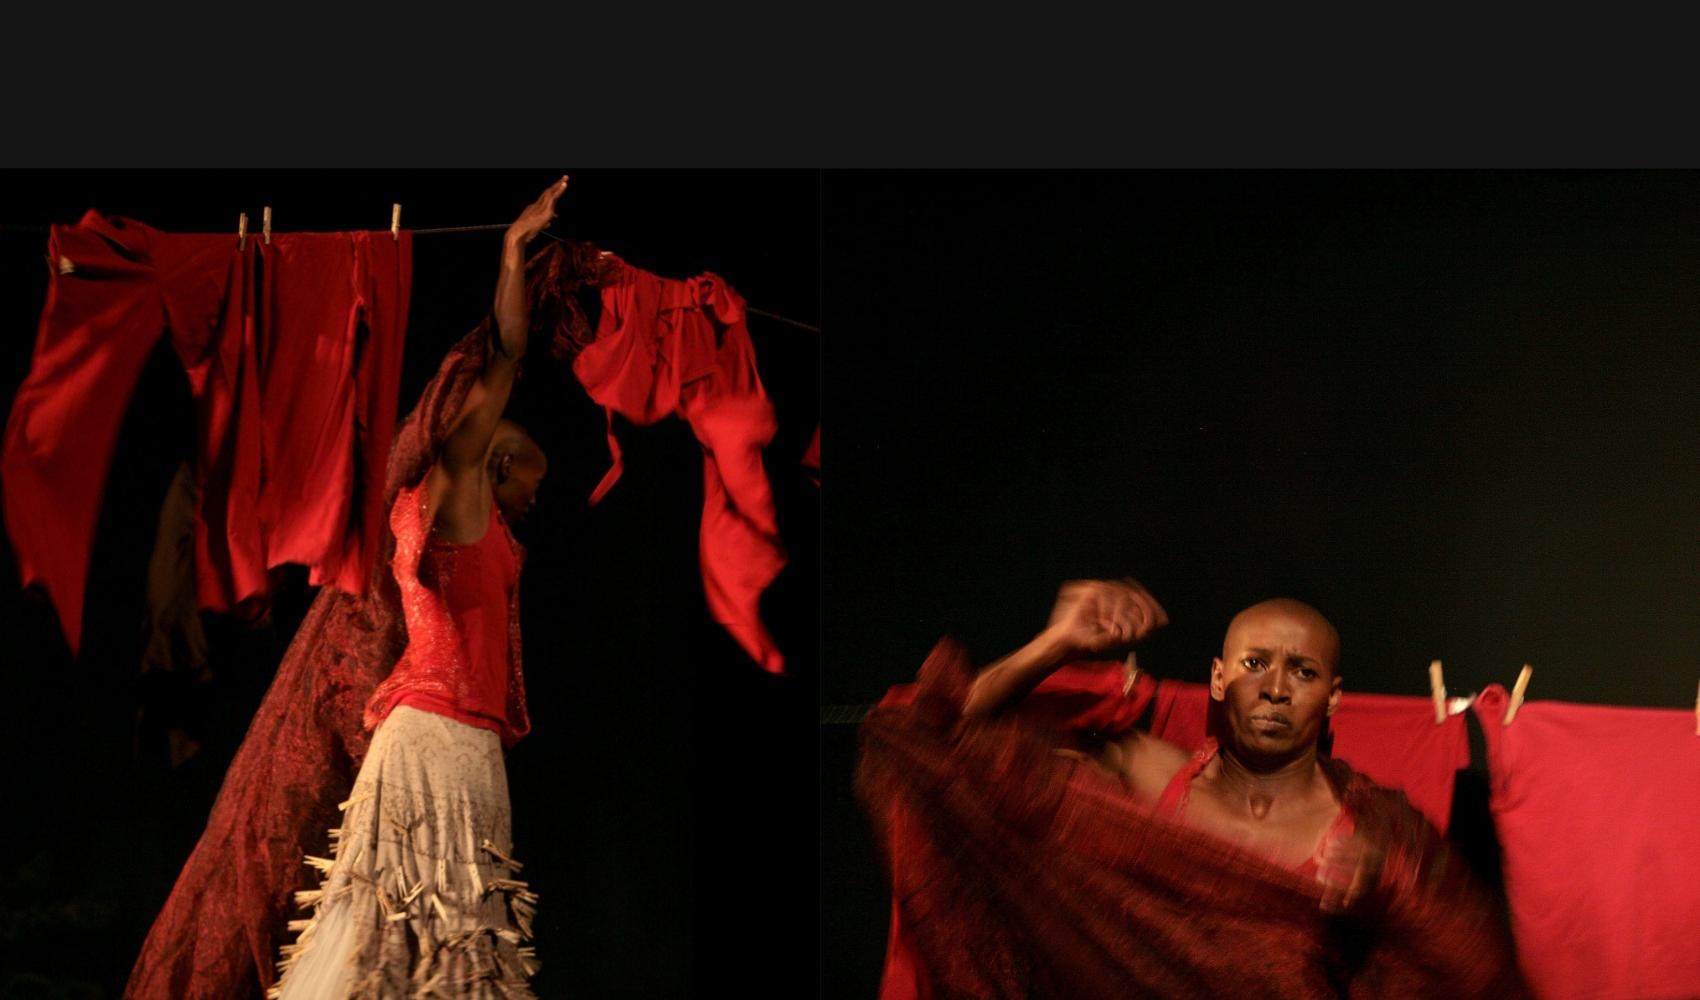 Mamela Nyamza photos of a dance performance. She is wearing red clothing with colorful overlays. She is dancing in both photos, one on the left and one on the right. There are clothes on clothesline behind her. The background is black.